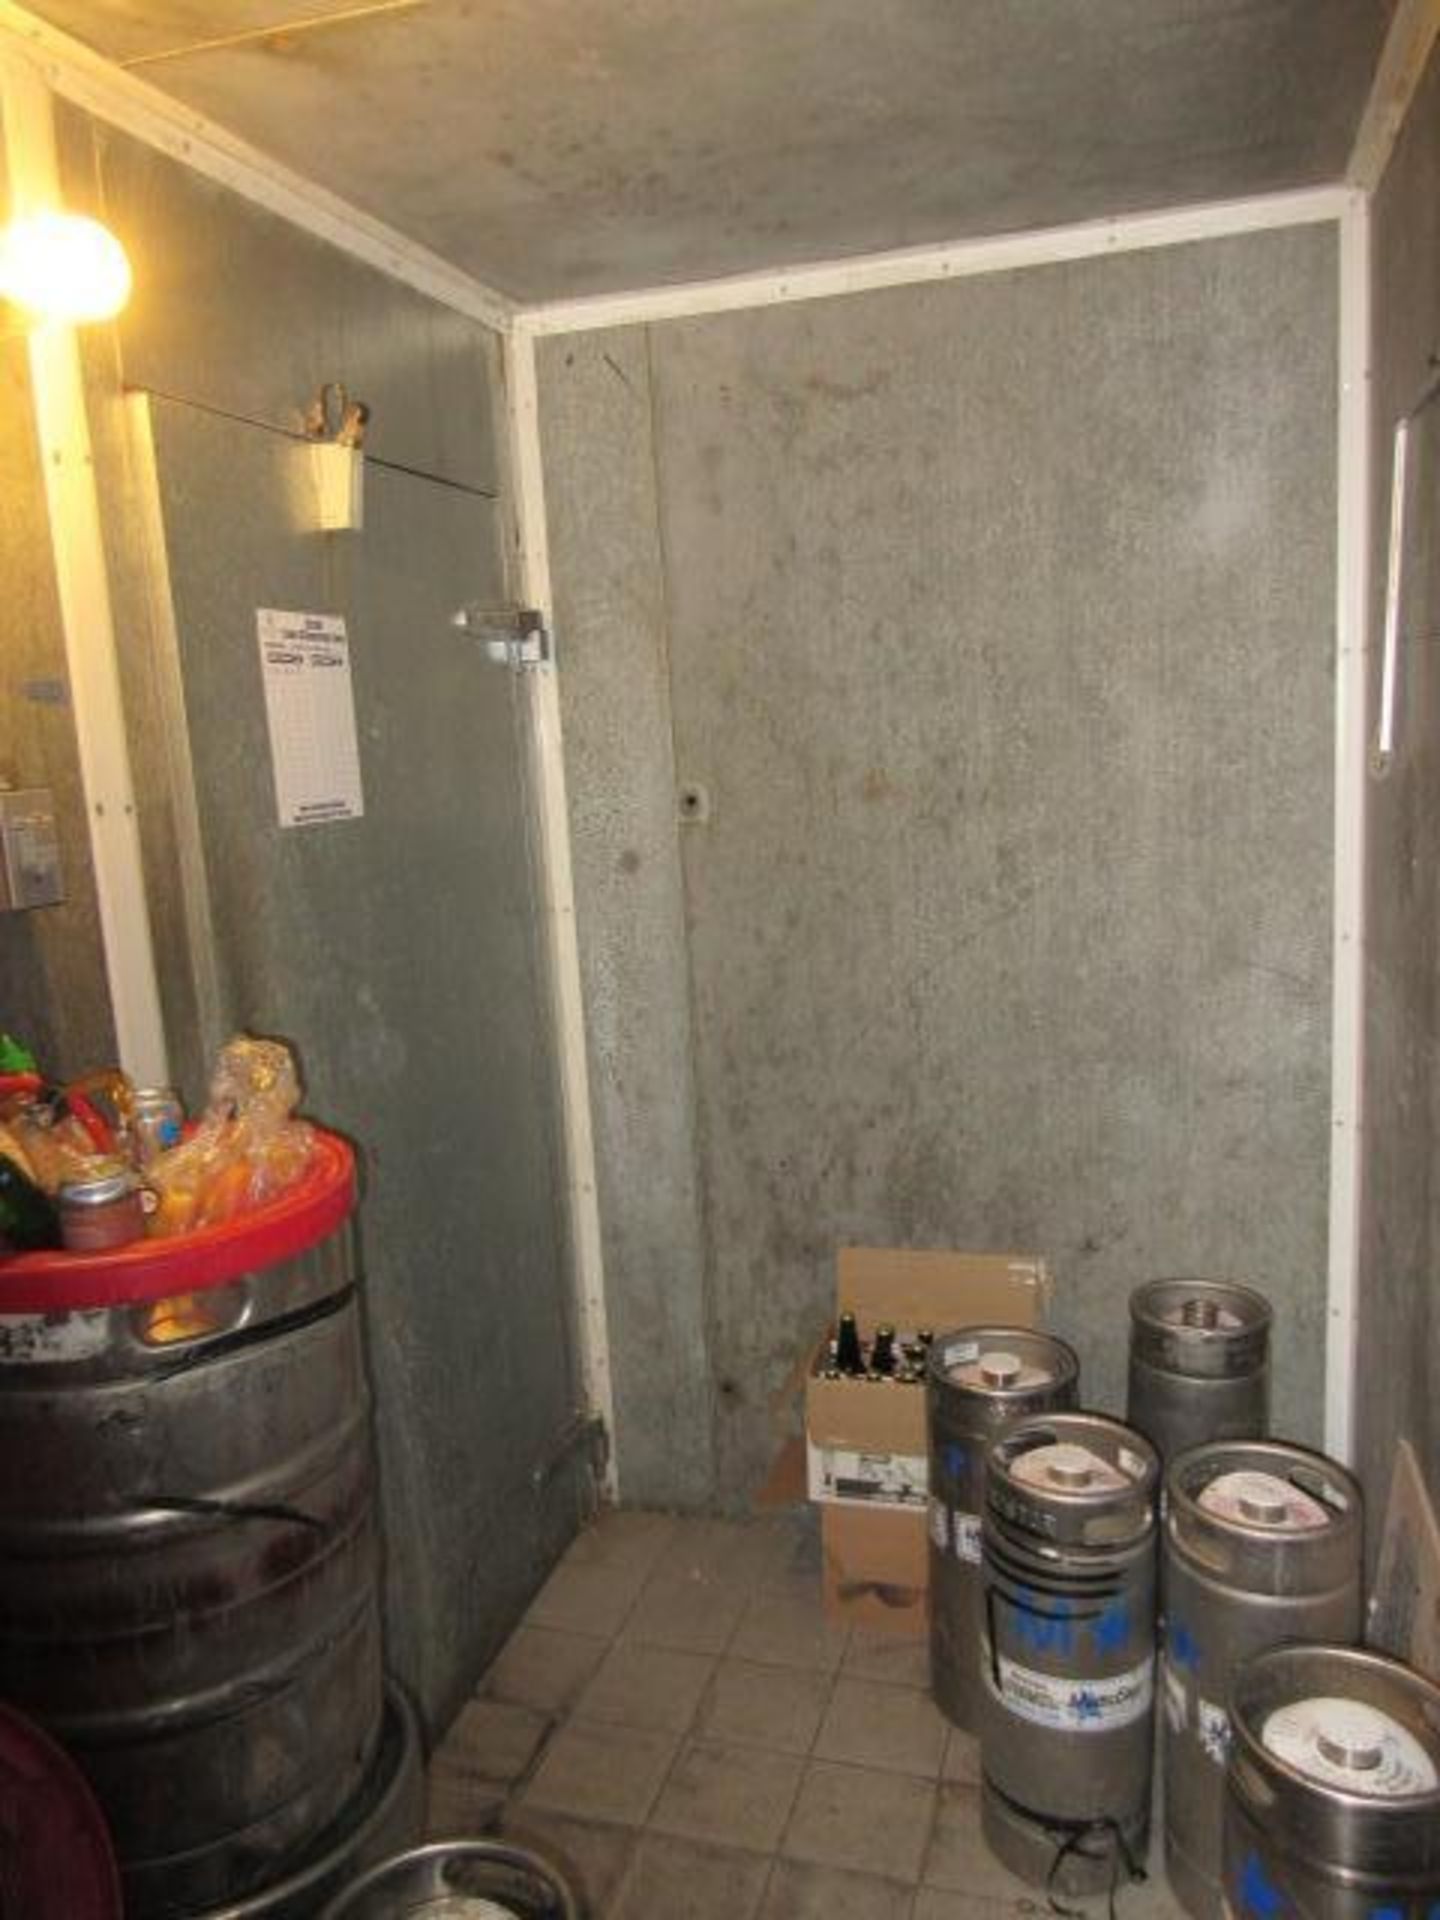 Walk-In Keg Cooler Located in Saratoga Springs, NY. - Image 5 of 5